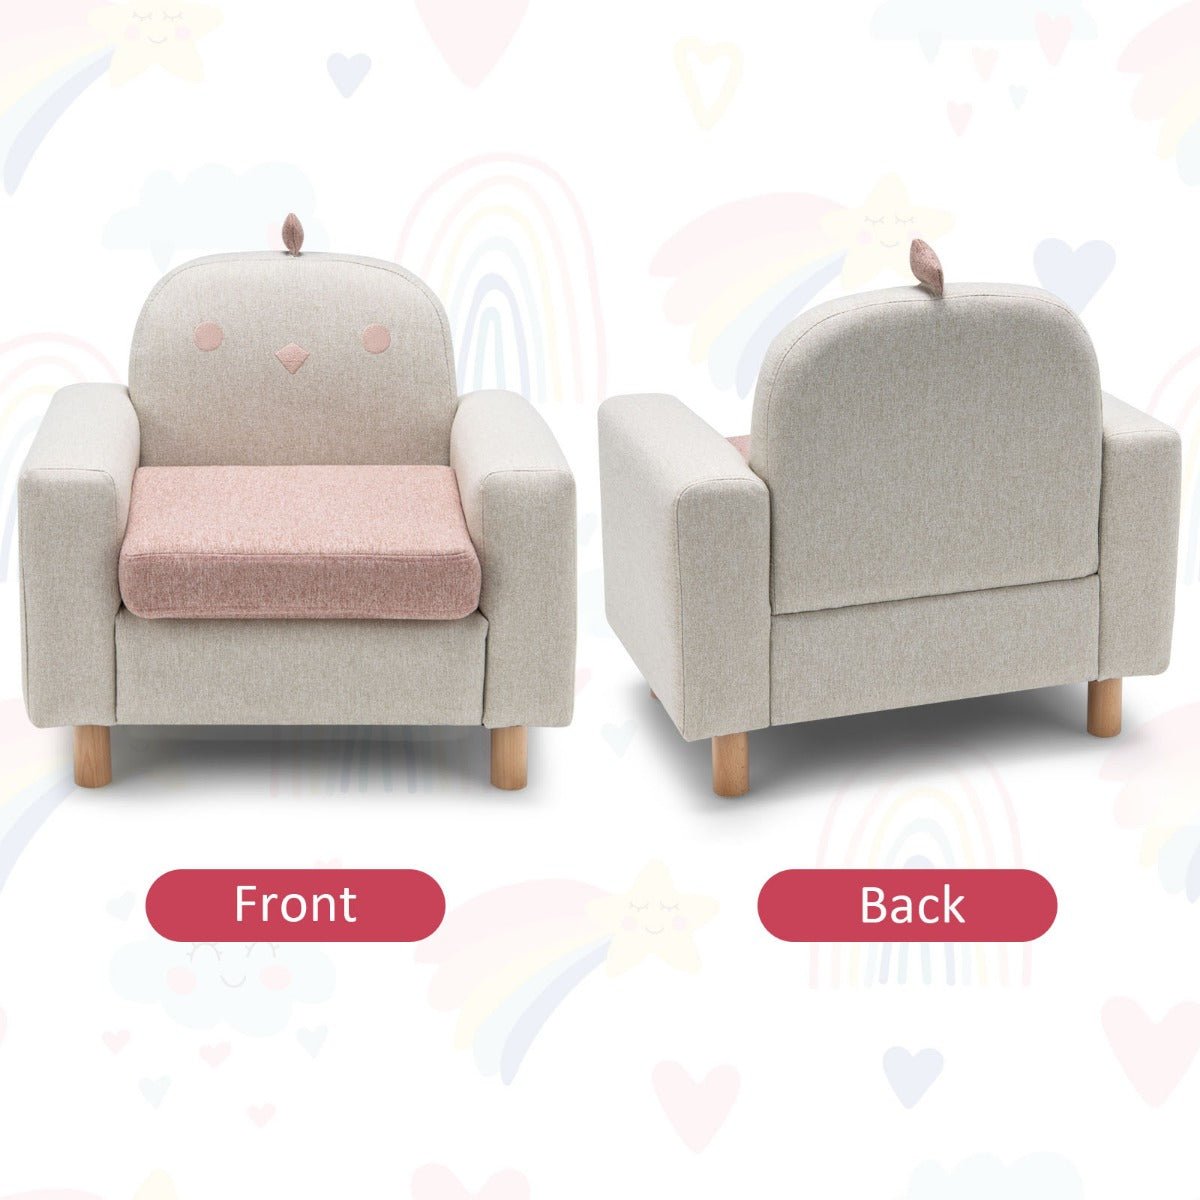 Embrace Comfort: Kids Sofa Chair with Wooden Armrests and Thick Cushion